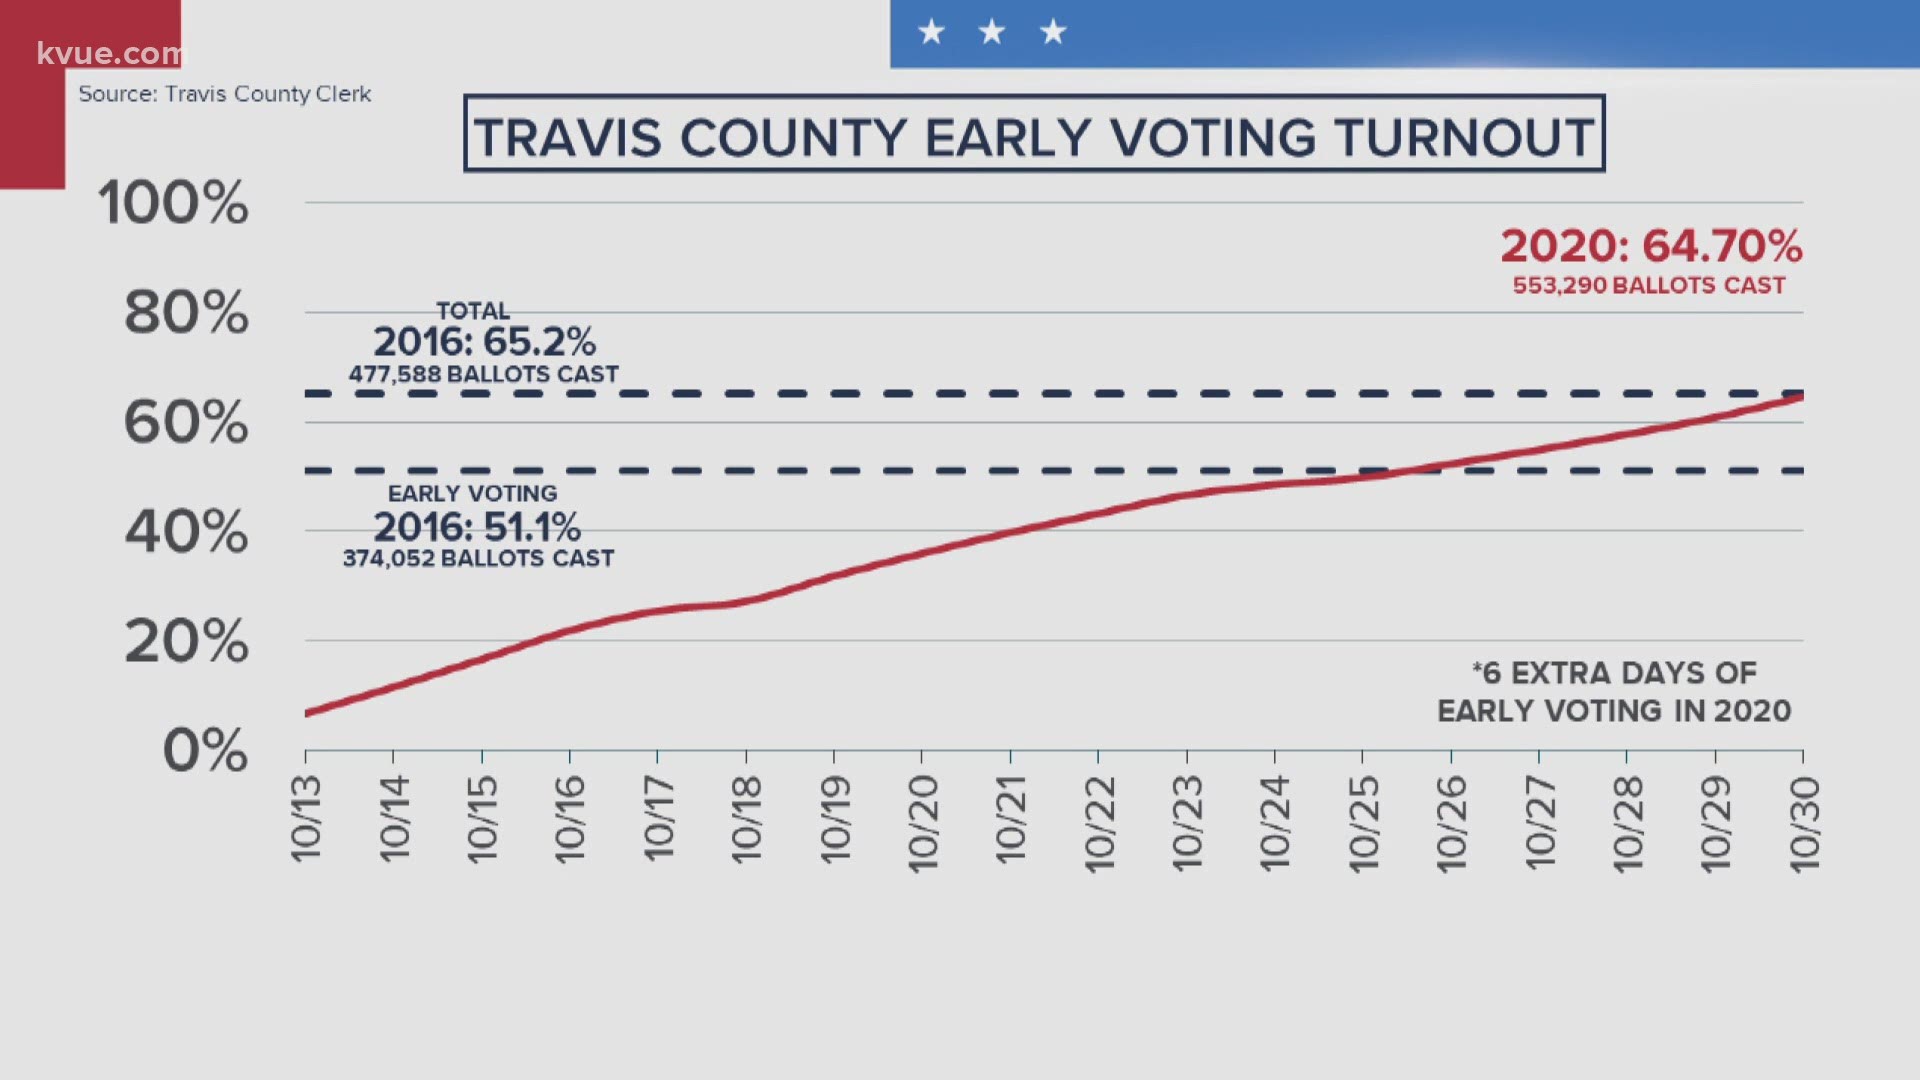 Here's how early voting turnout totals in Central Texas compare to 2016. Daranesha Herron breaks it down by county.